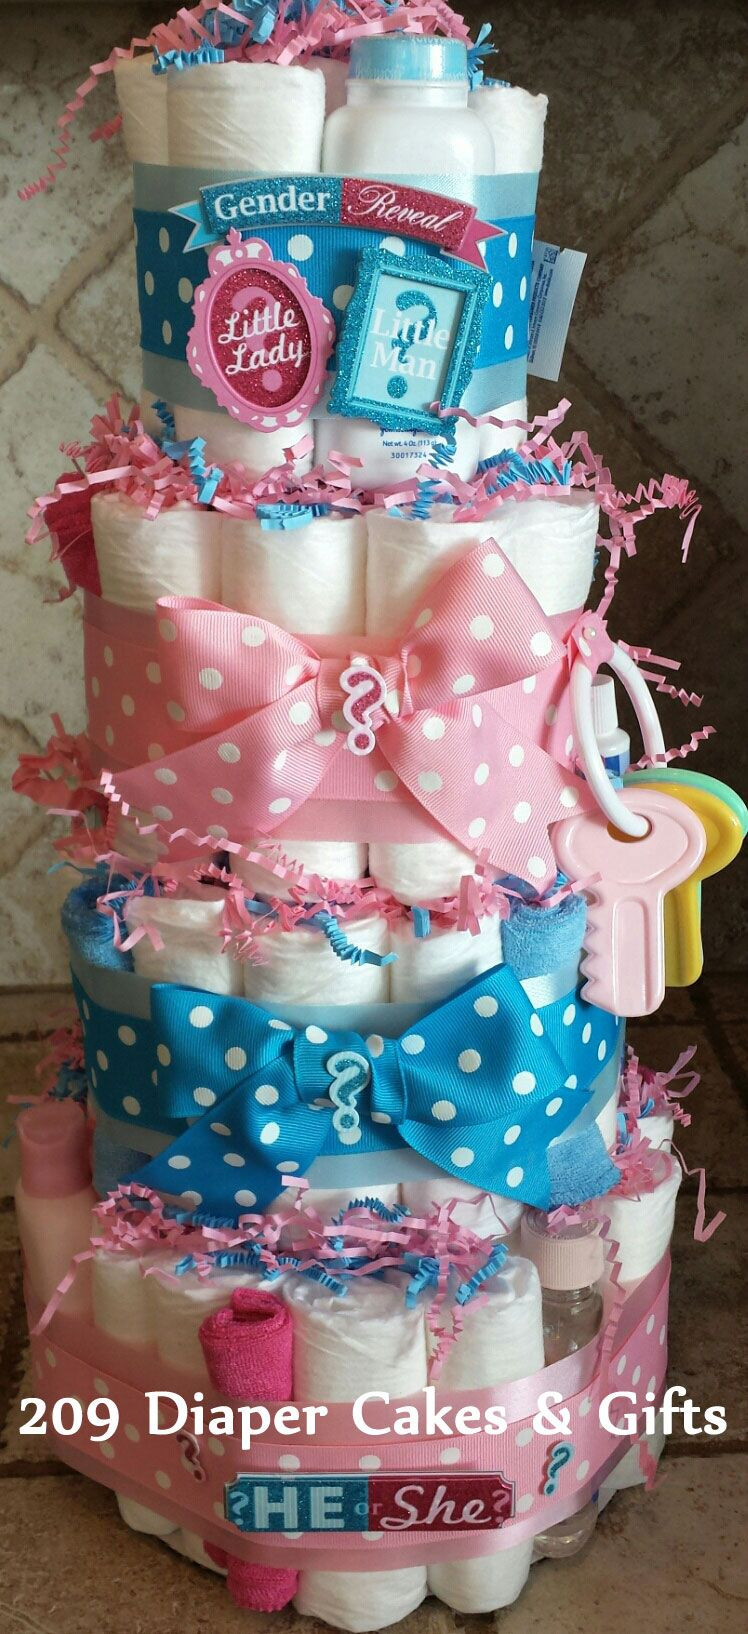 Gift Ideas For Baby Gender Reveal Party
 4 Tier Pink & Blue Gender Reveal Diaper Cake by 209 Diaper